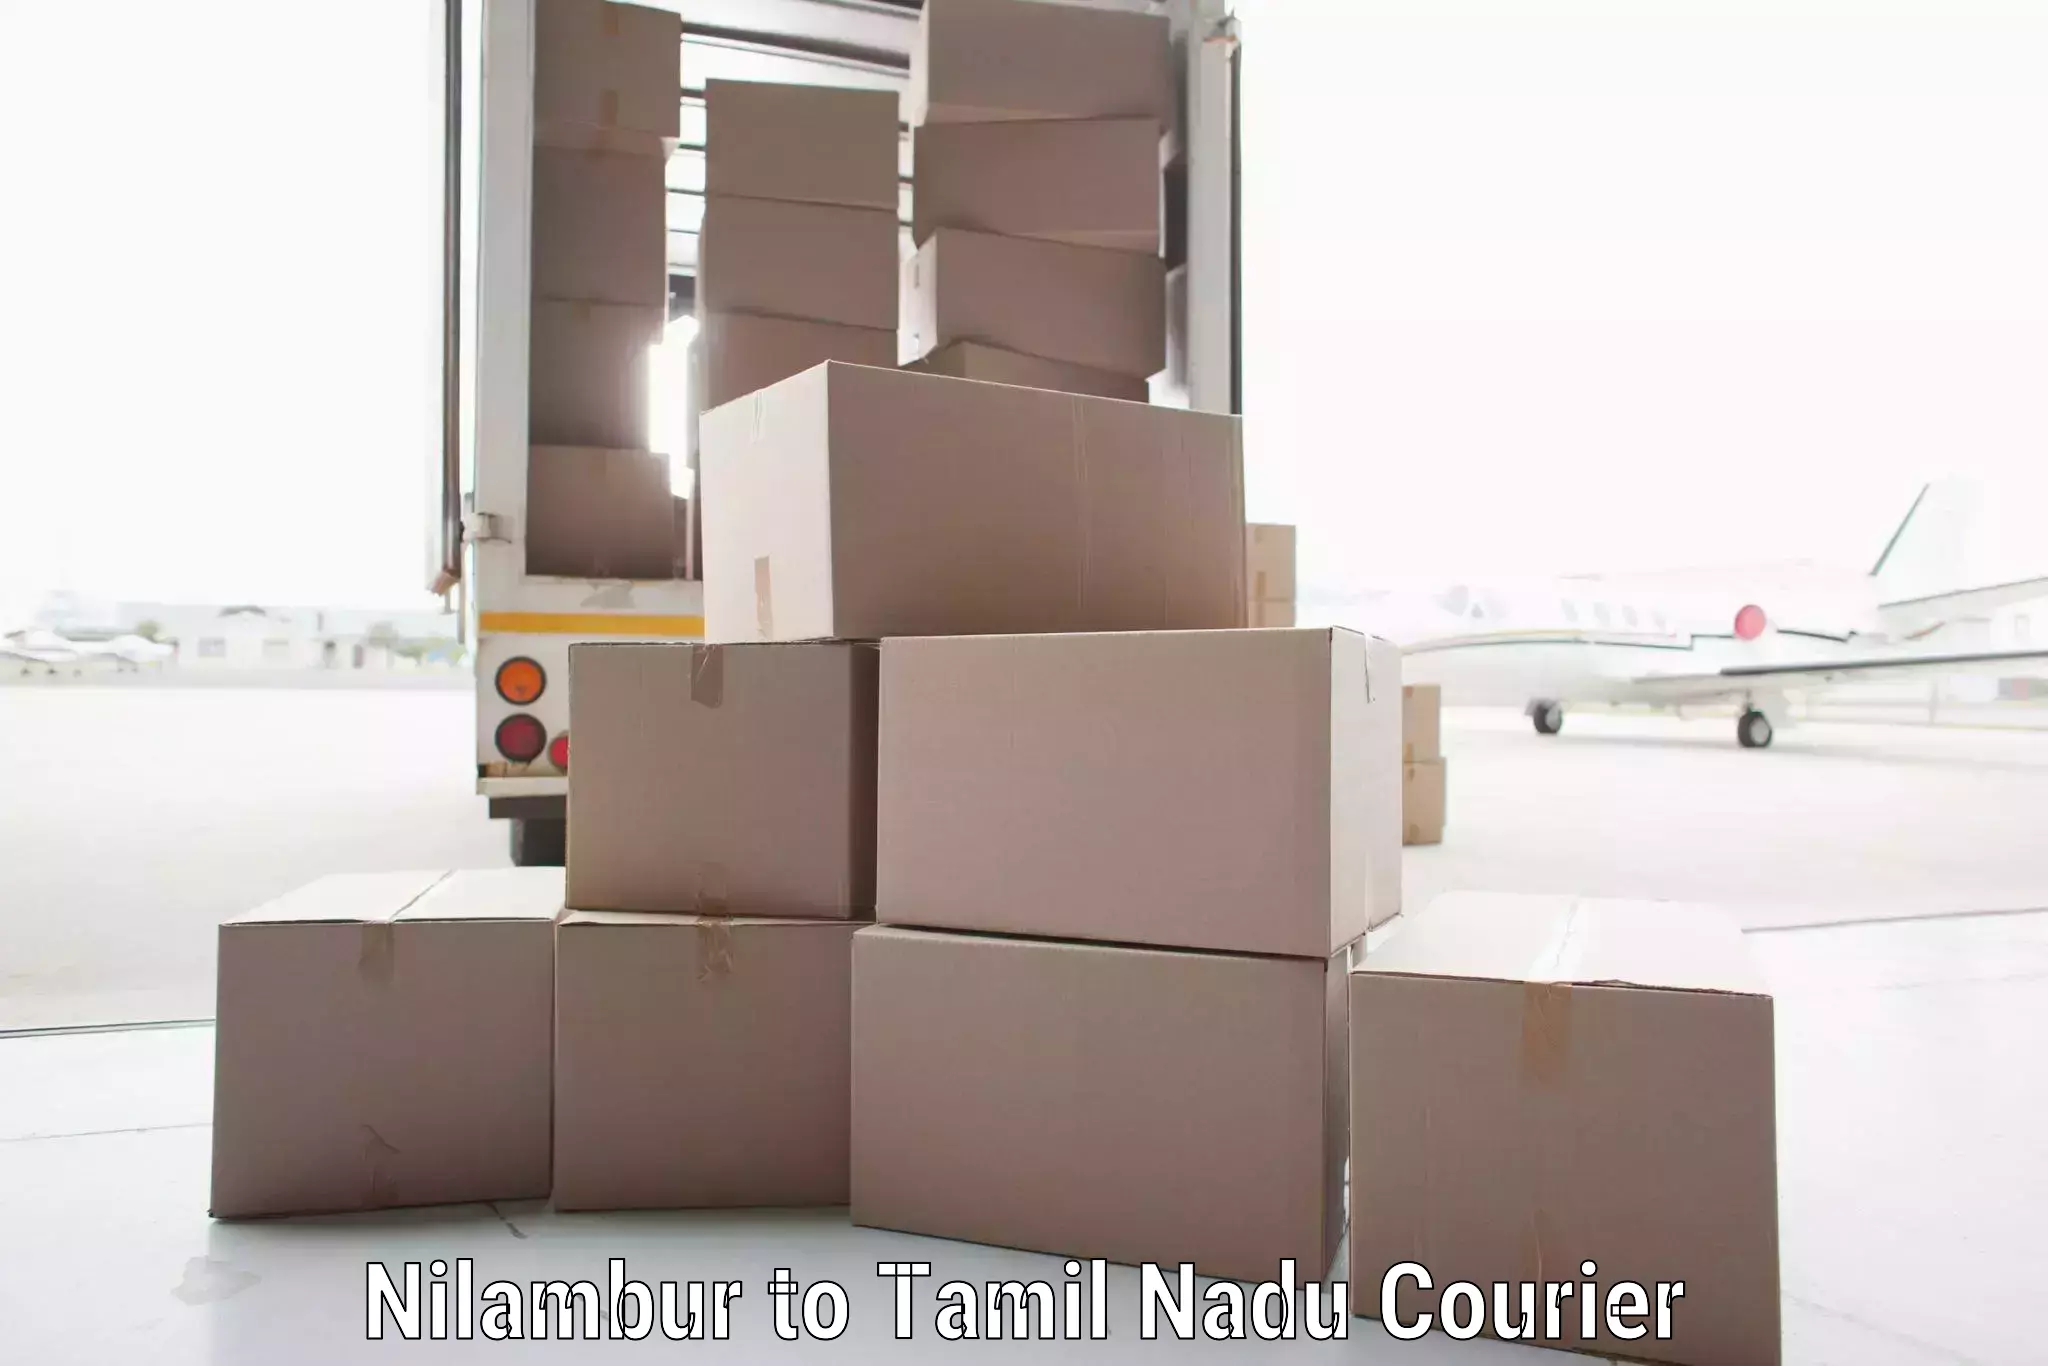 State-of-the-art courier technology Nilambur to Ennore Port Chennai